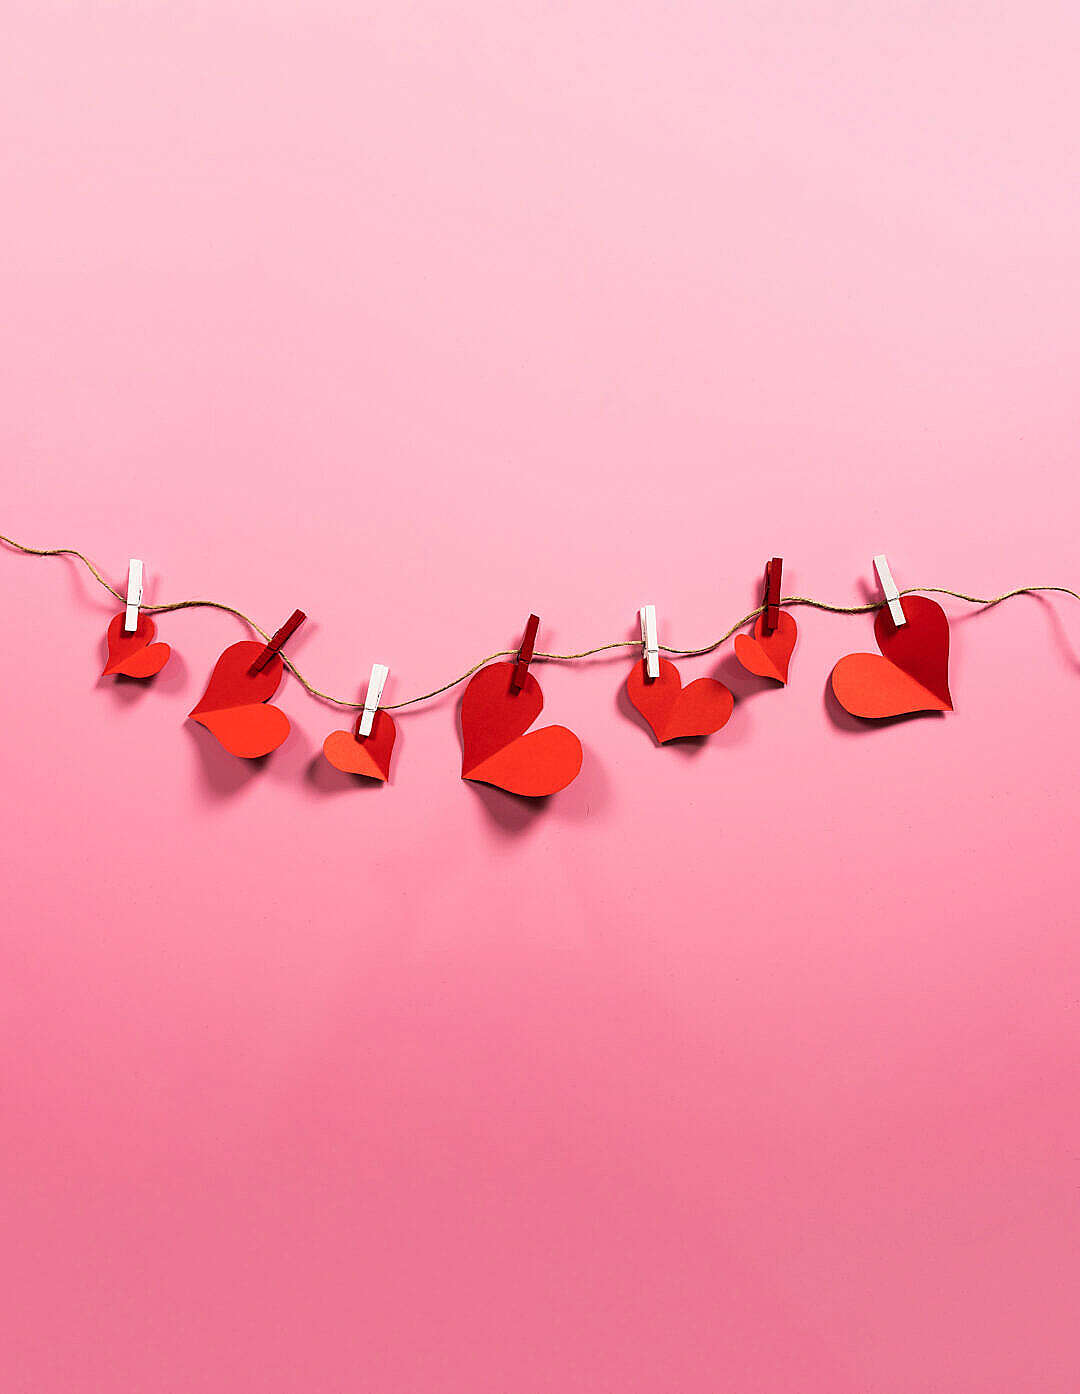 Download Romantic Love Paper Red Hearts Hanging on a String FREE Stock Photo